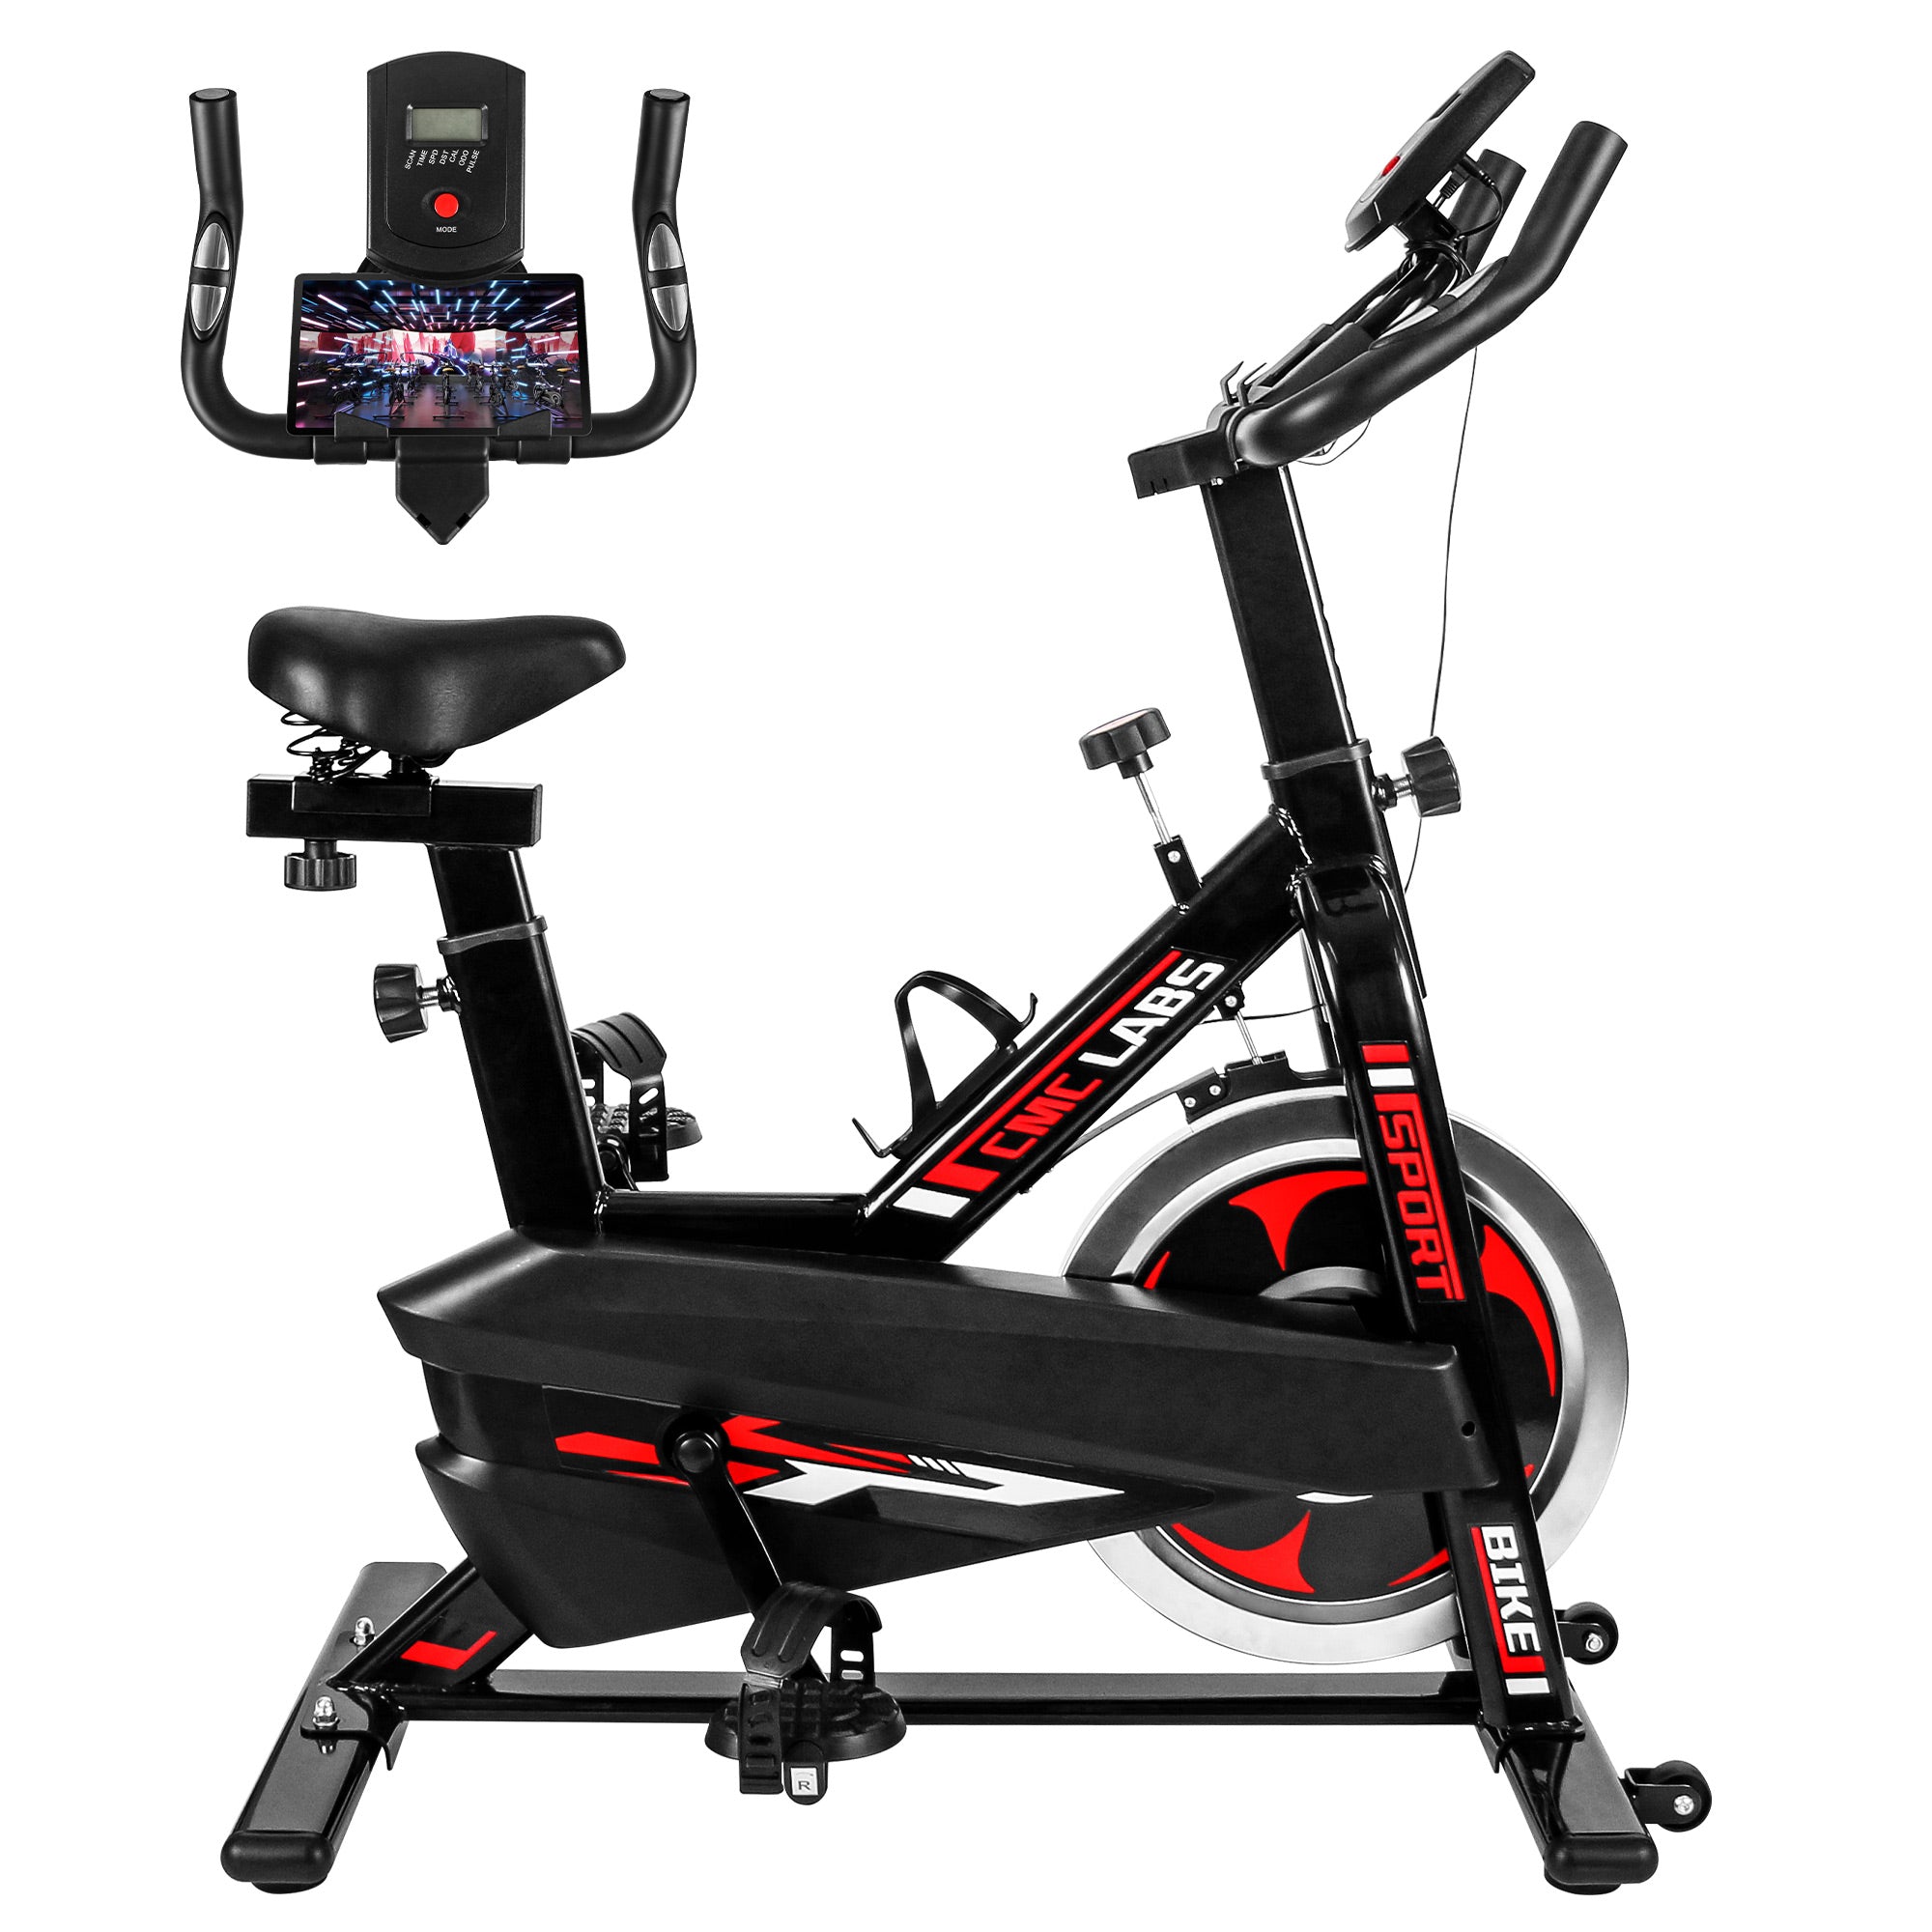 CMCLABS Spin Bike, Brake Pad Stationary Bike for Home, Indoor Cycling Bike with Heavy Flywheel, Comfortable Seat Cushion，Exercise Bike